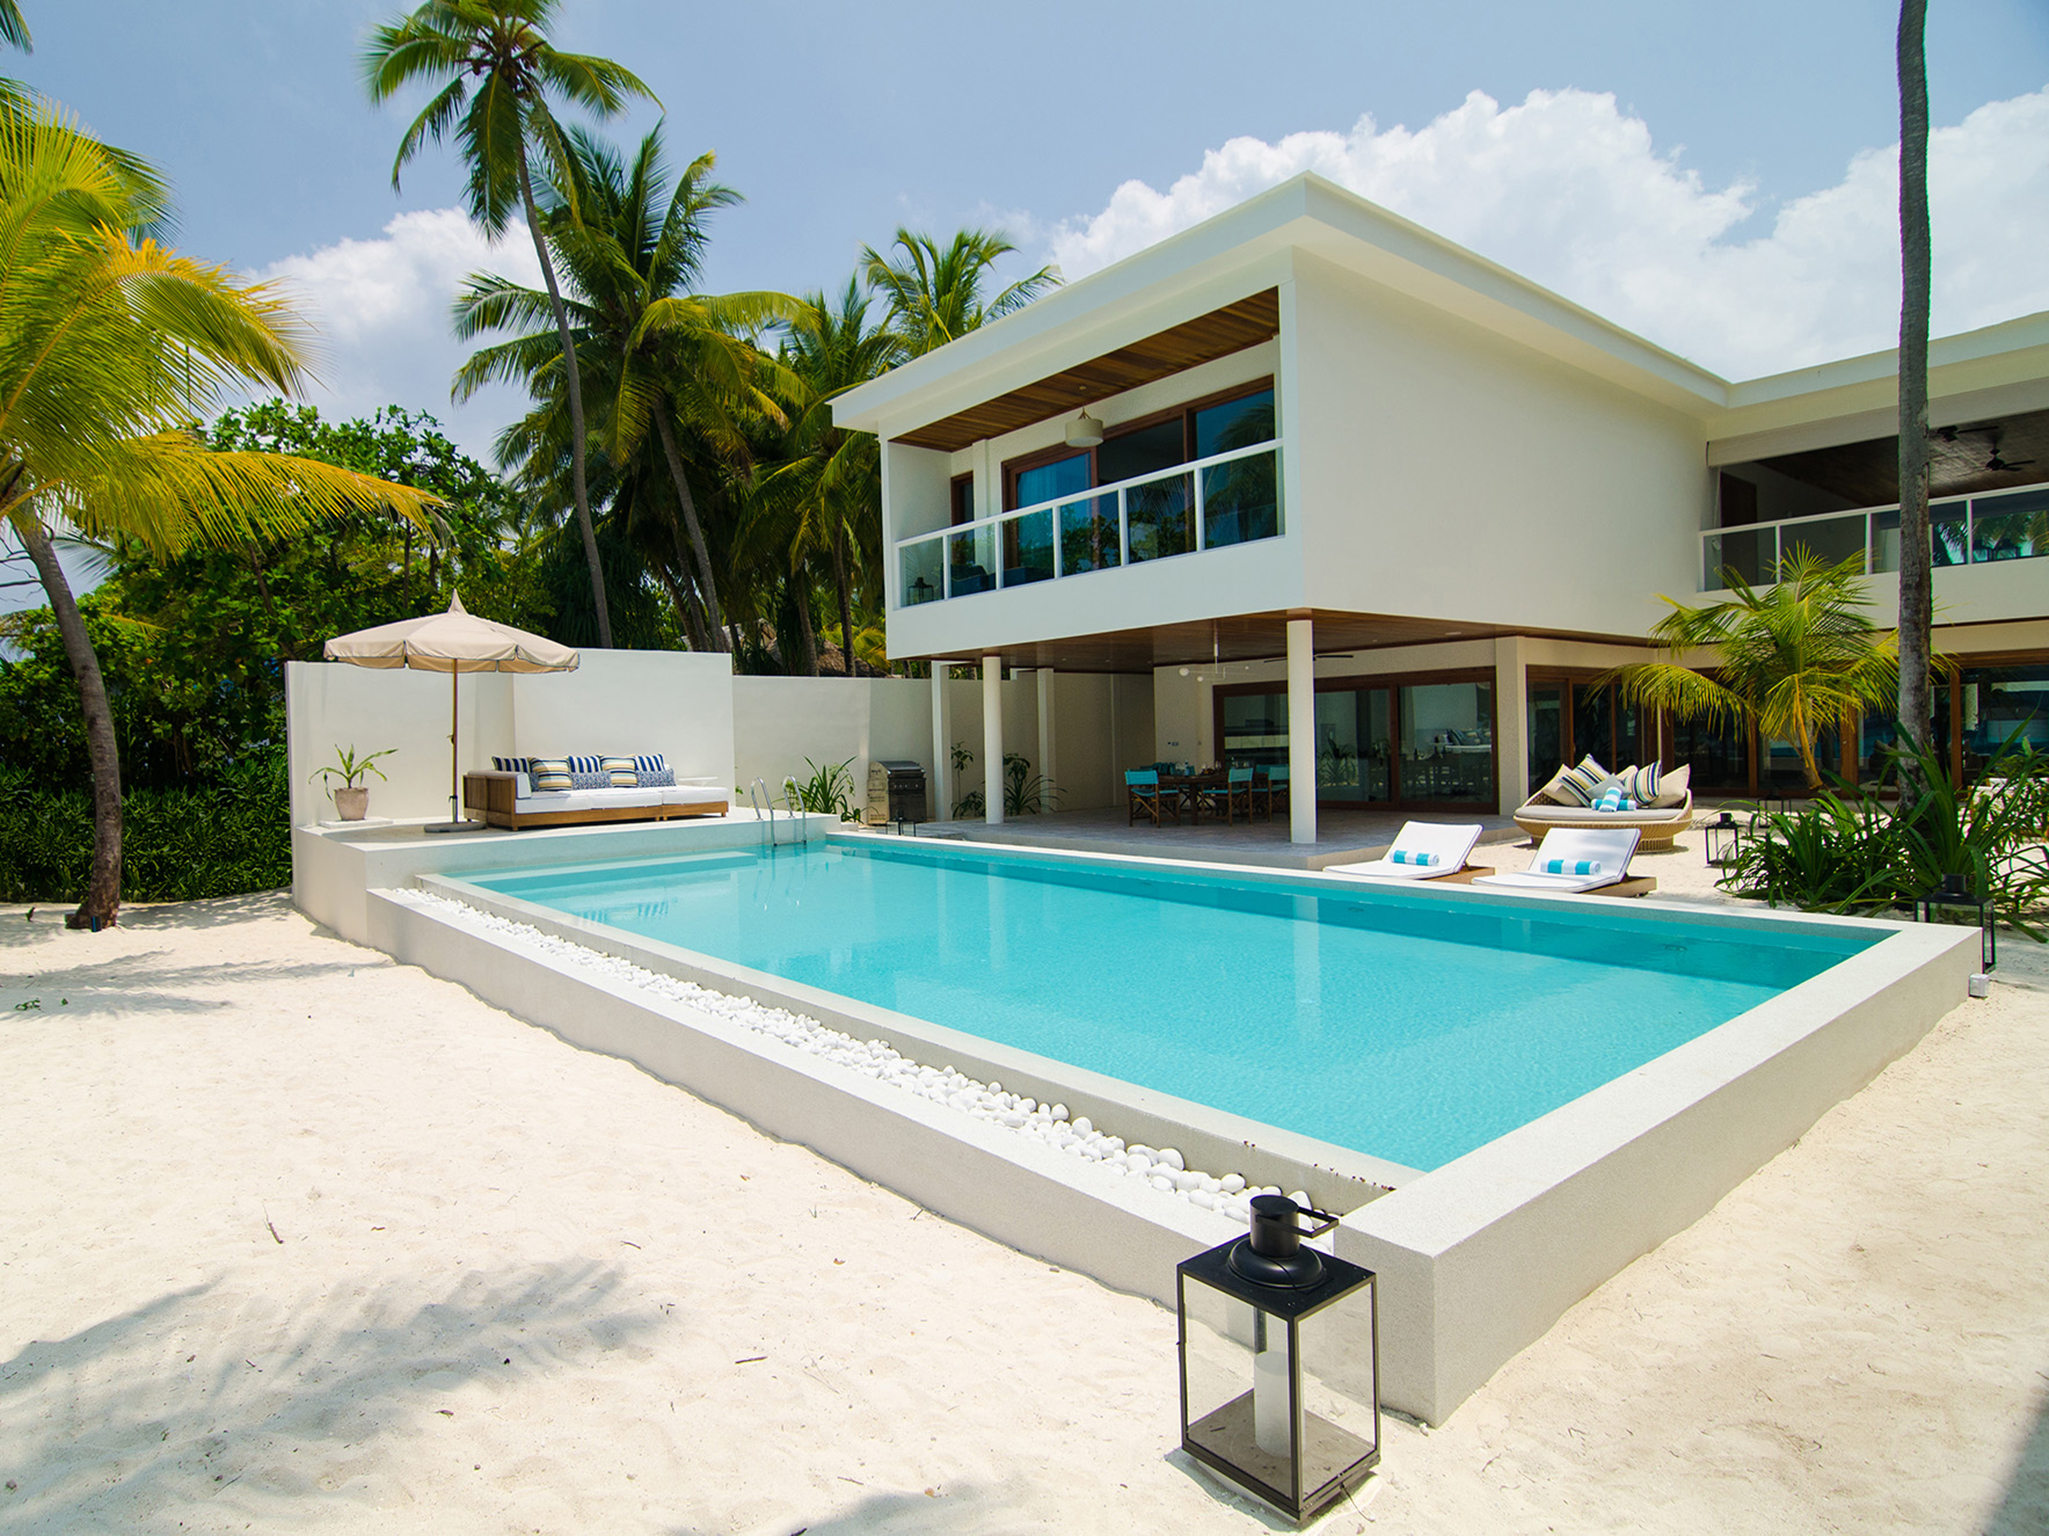 4 Bedroom Villa Residences - Relax and indulge poolside